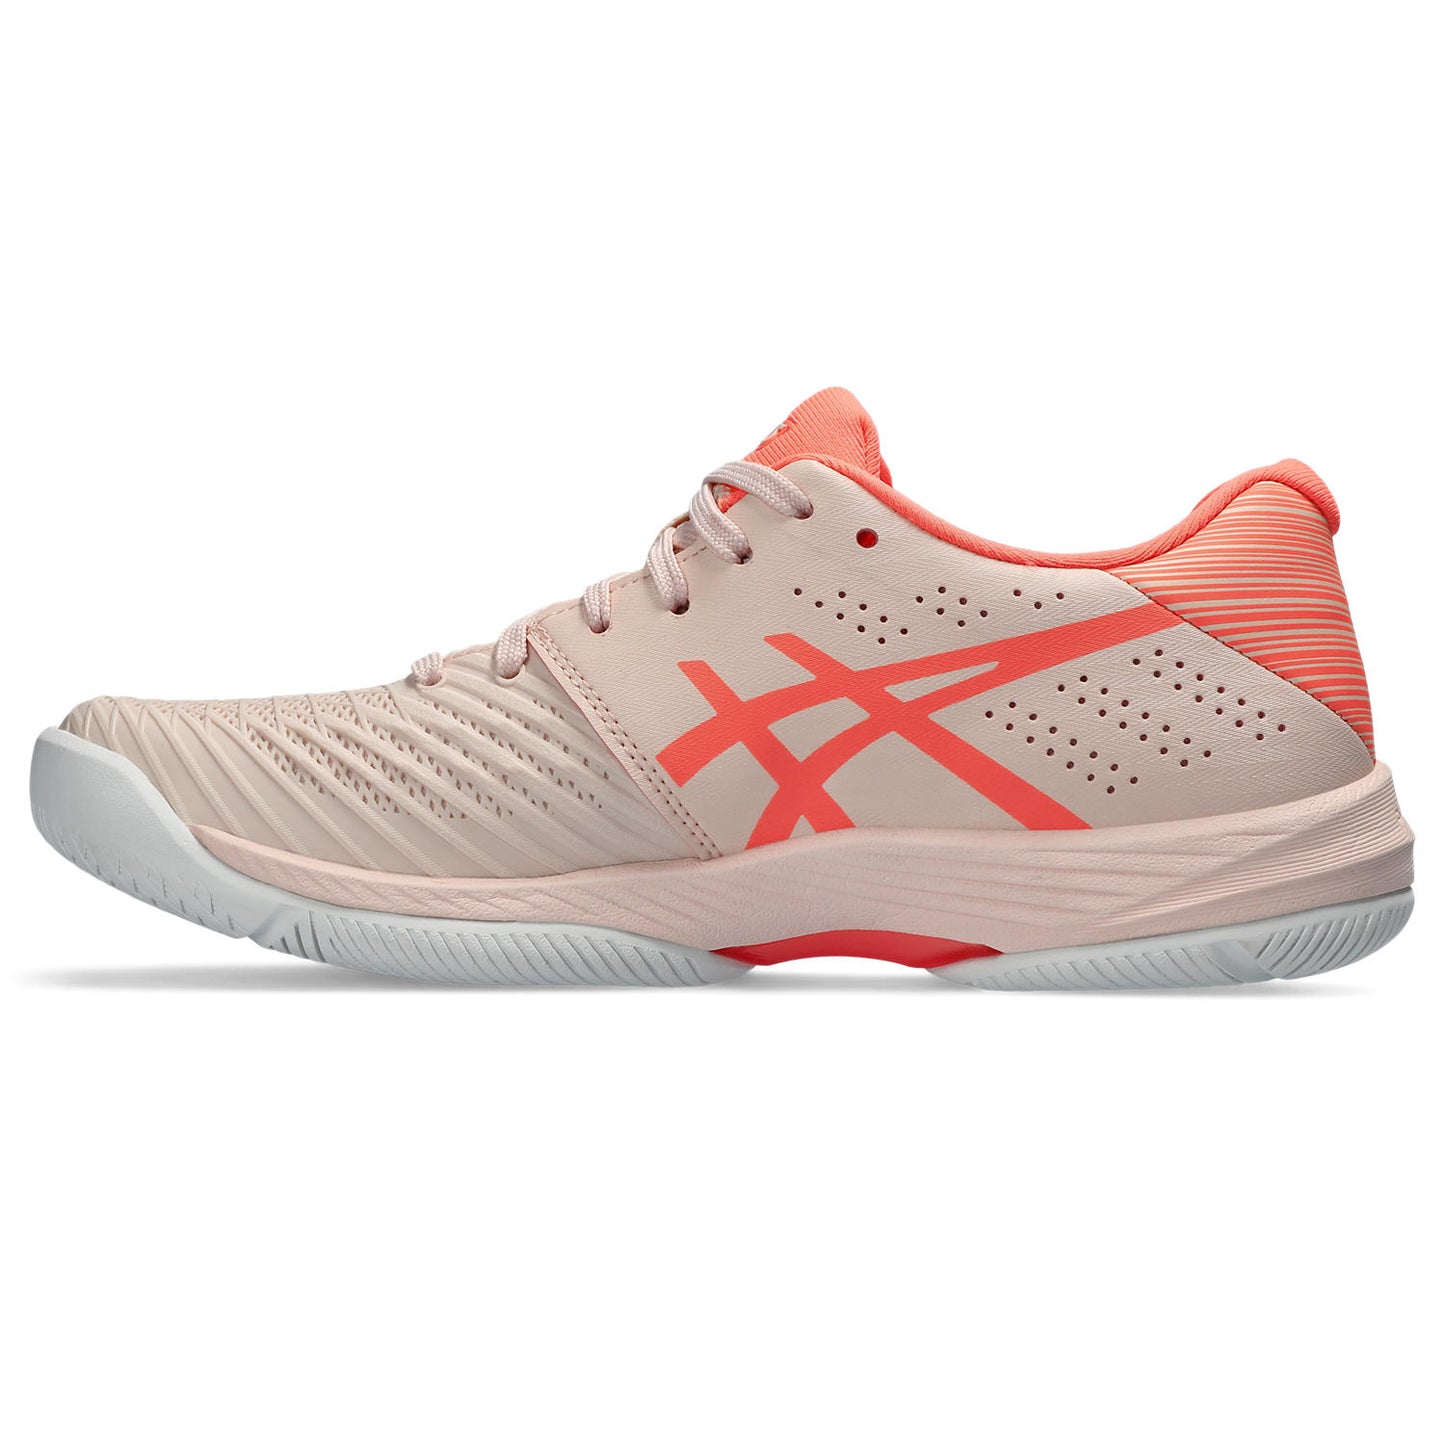 Asics Solution Swift FF women's tennis shoes 197.701 Pearl/Coral